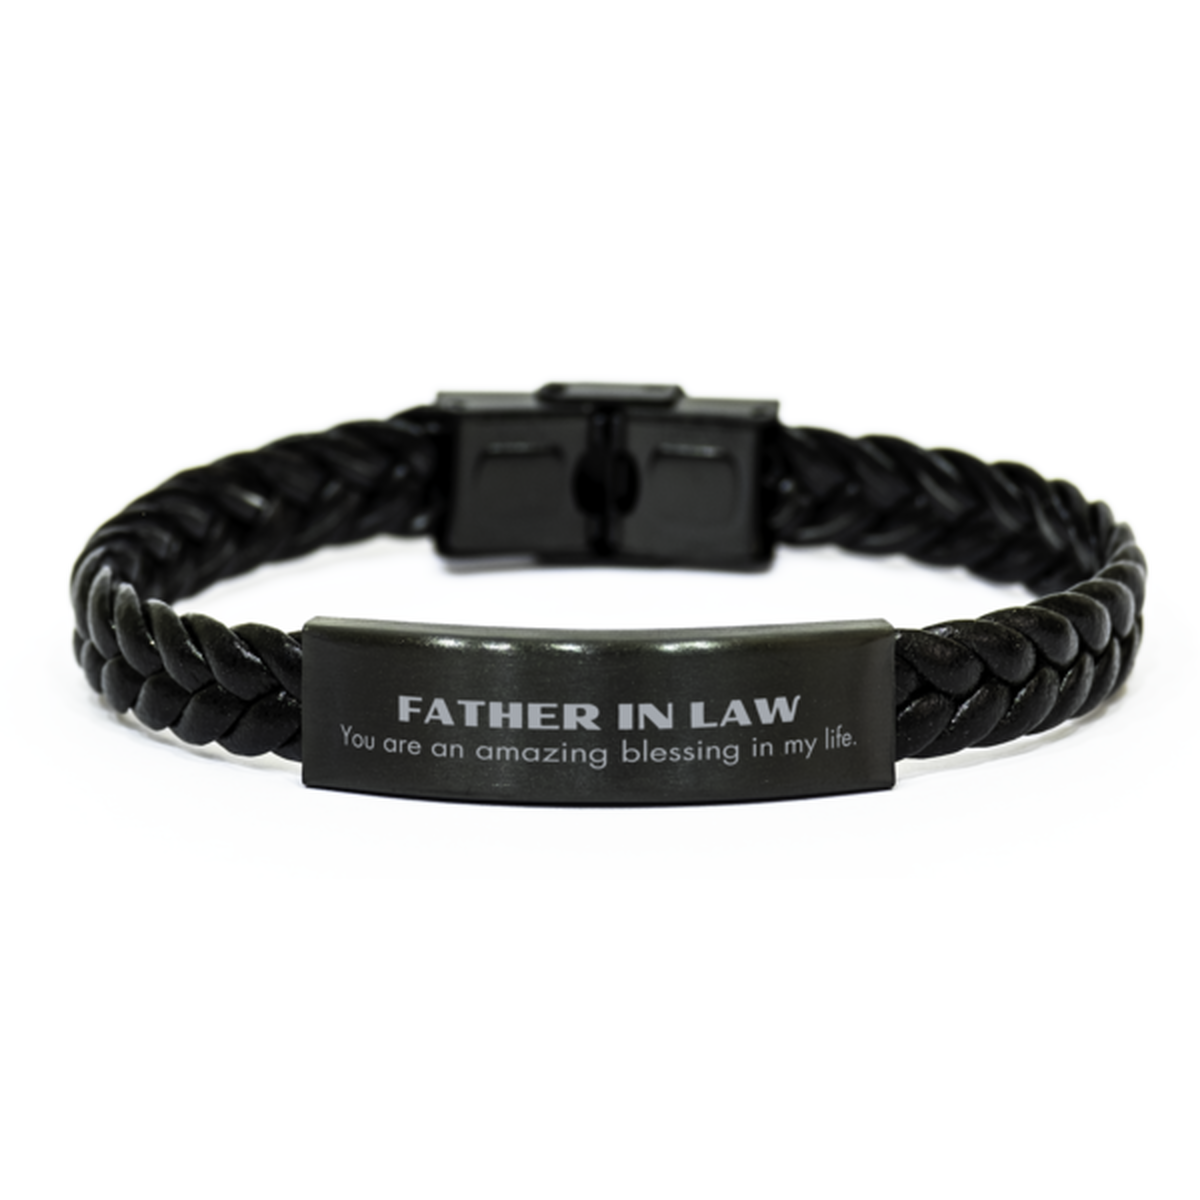 Father In Law Braided Leather Bracelet, You are an amazing blessing in my life, Thank You Gifts For Father In Law, Inspirational Birthday Christmas Unique Gifts For Father In Law